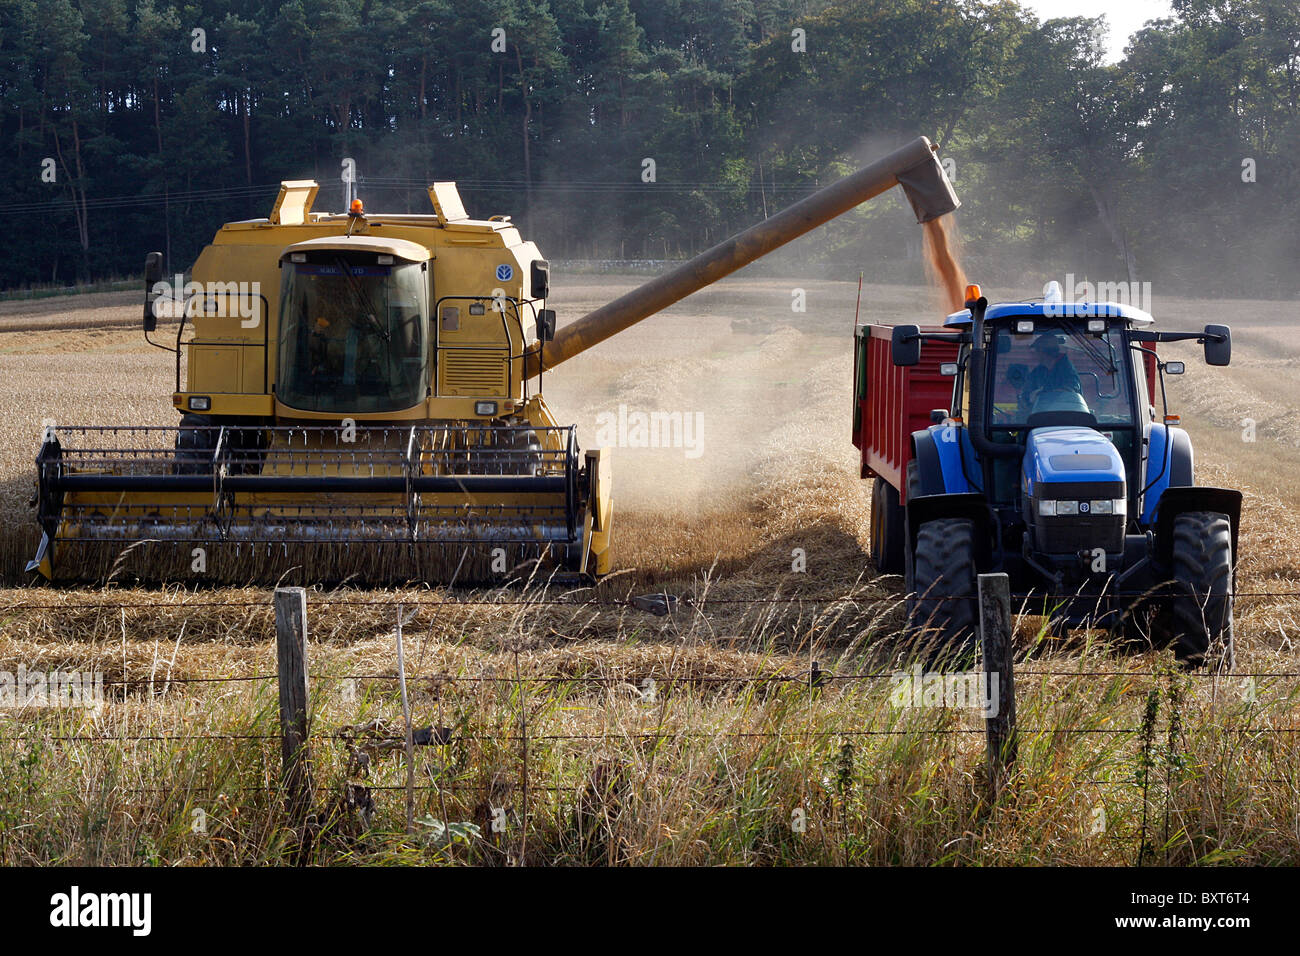 Combine harvester and tractor bringing in the harvest. Stock Photo